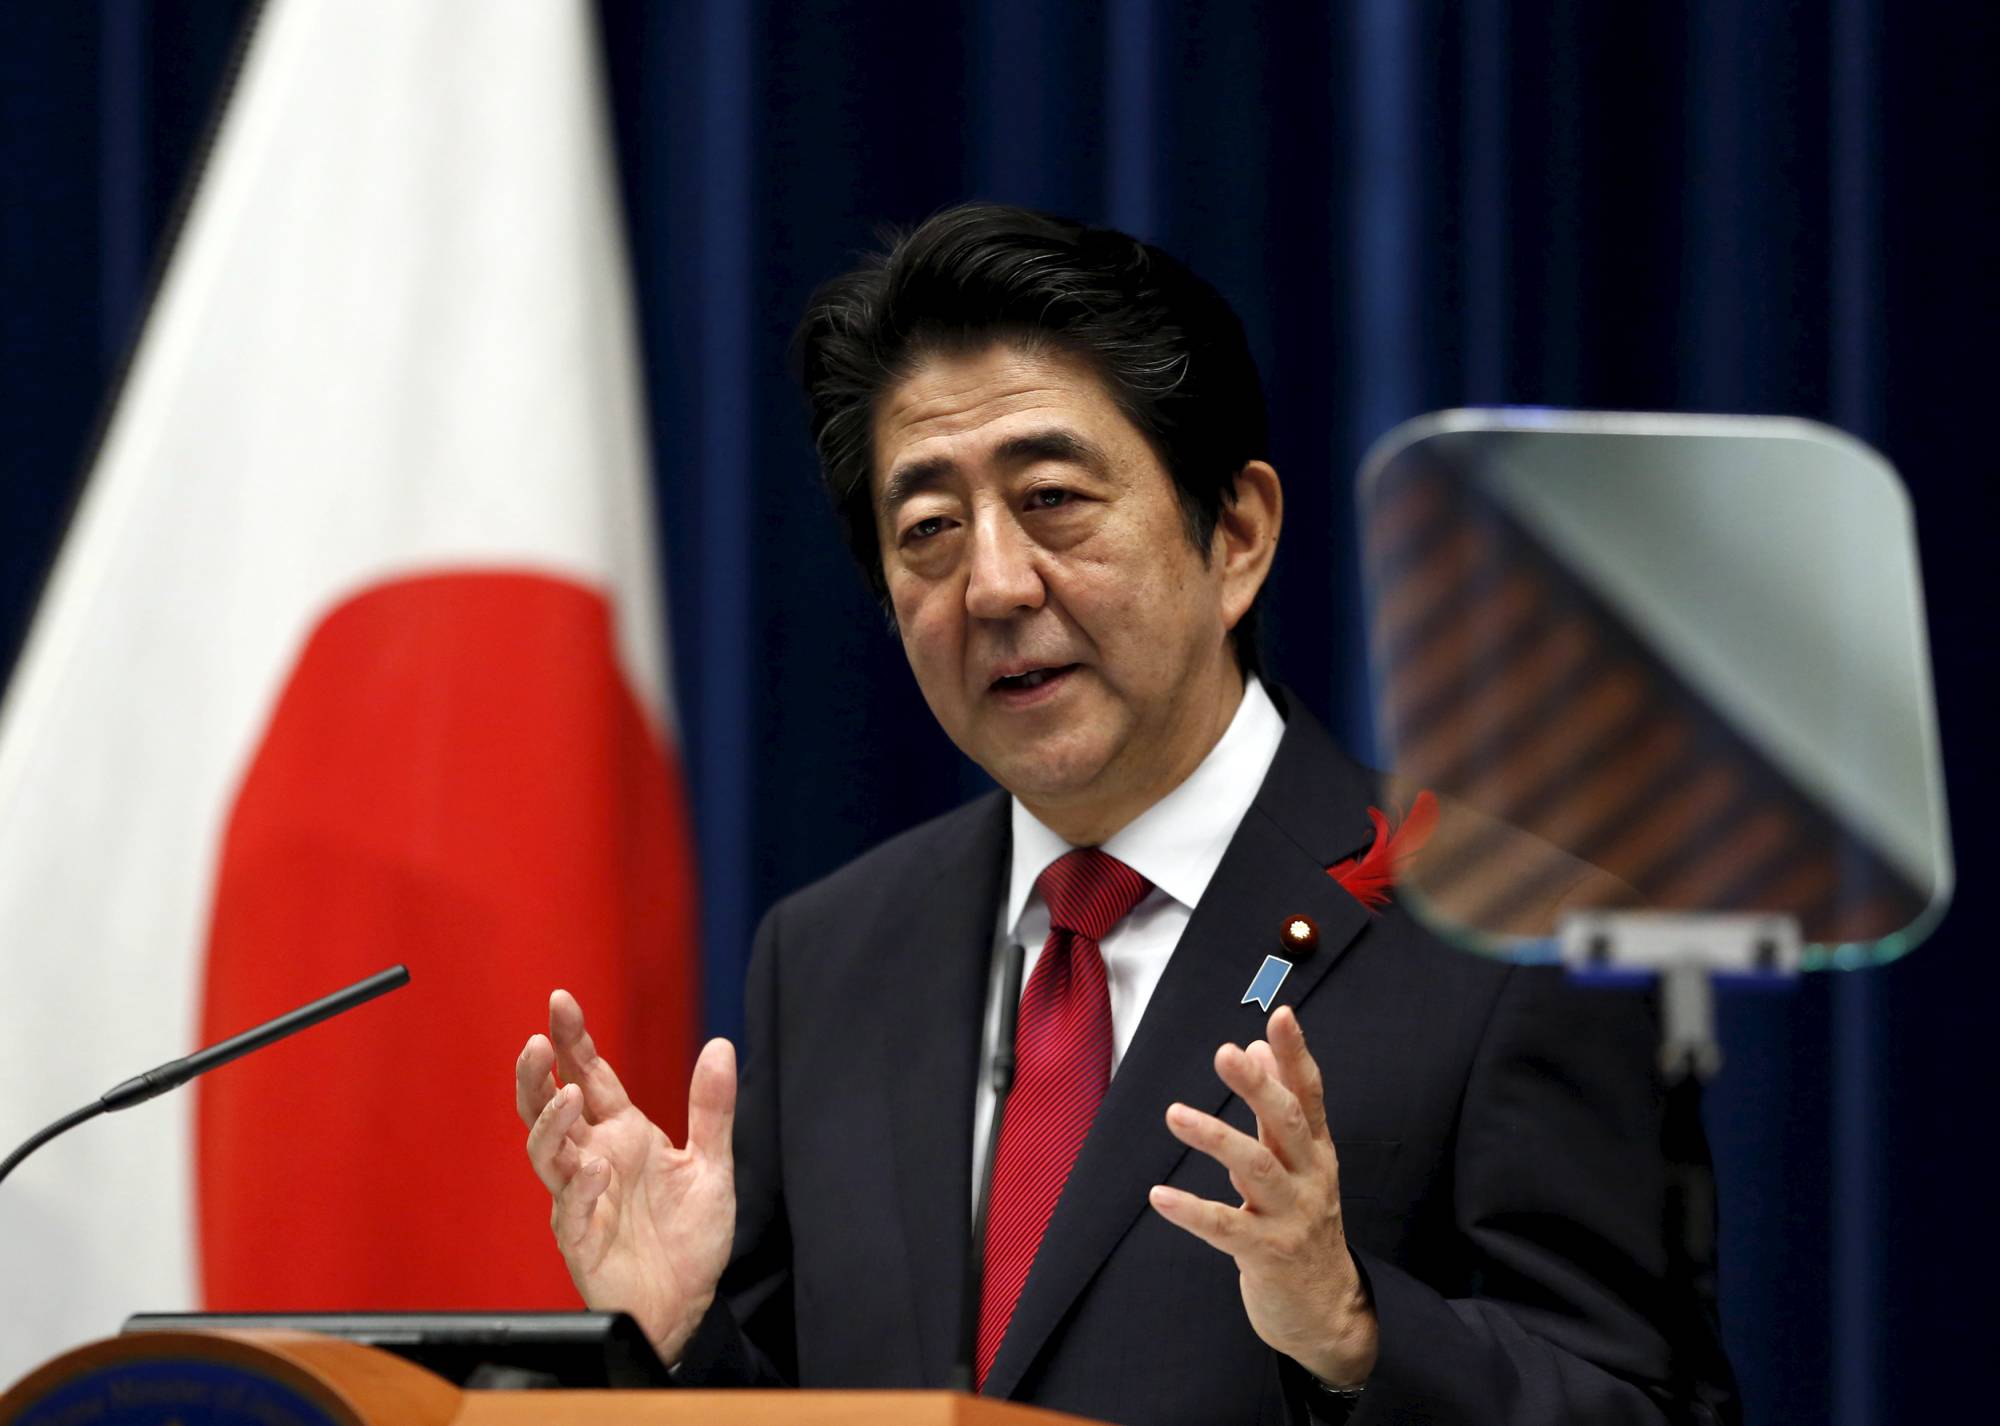 Former Prime Minister Shinzo Abe has been credited by some with significantly forwarding Japan's efforts in geoeconomics. | REUTERS